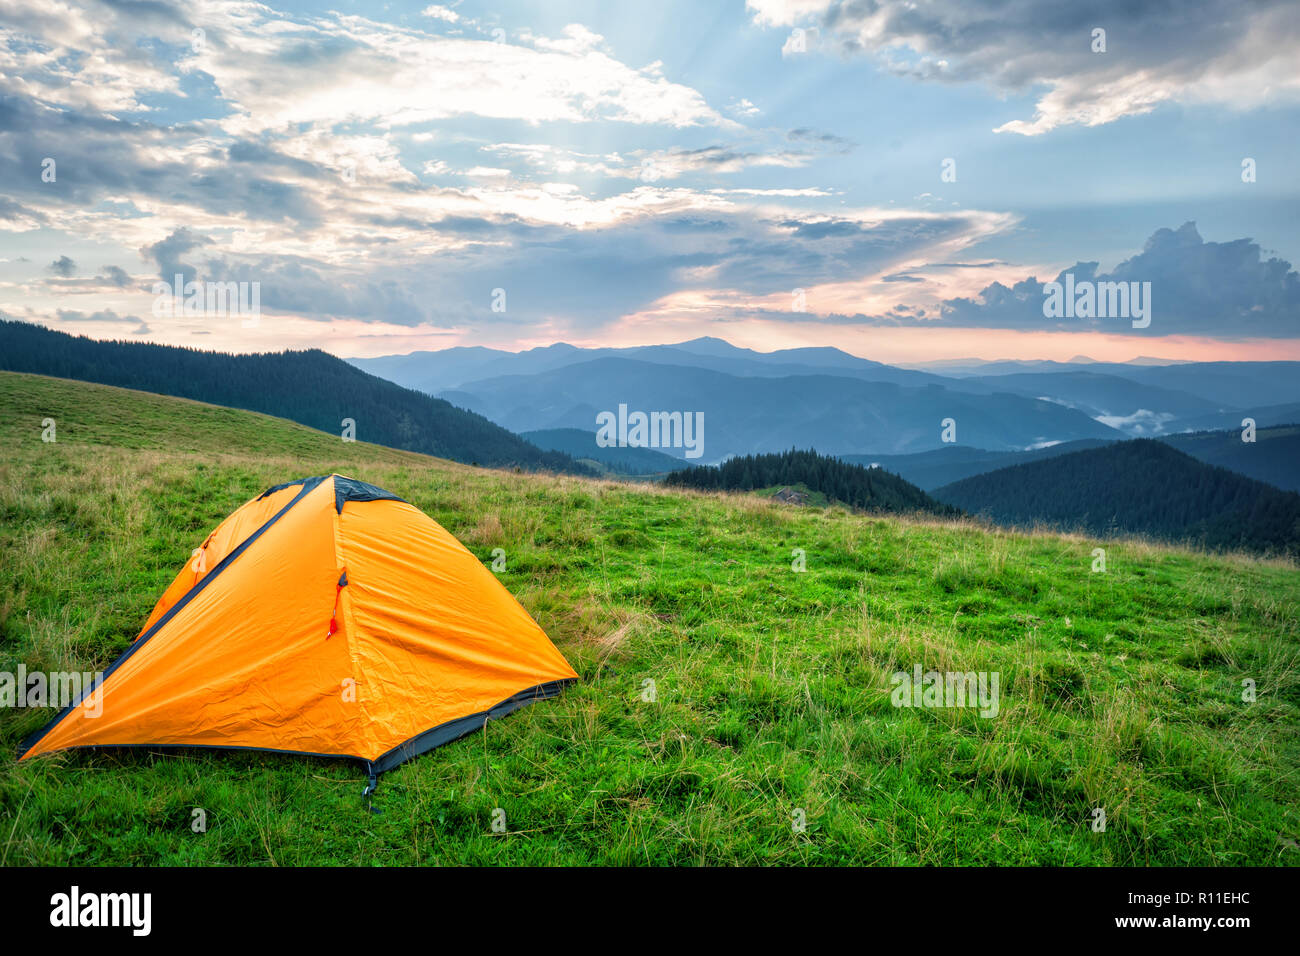 Orange tourist tent in mountains covered with green grass Stock Photo